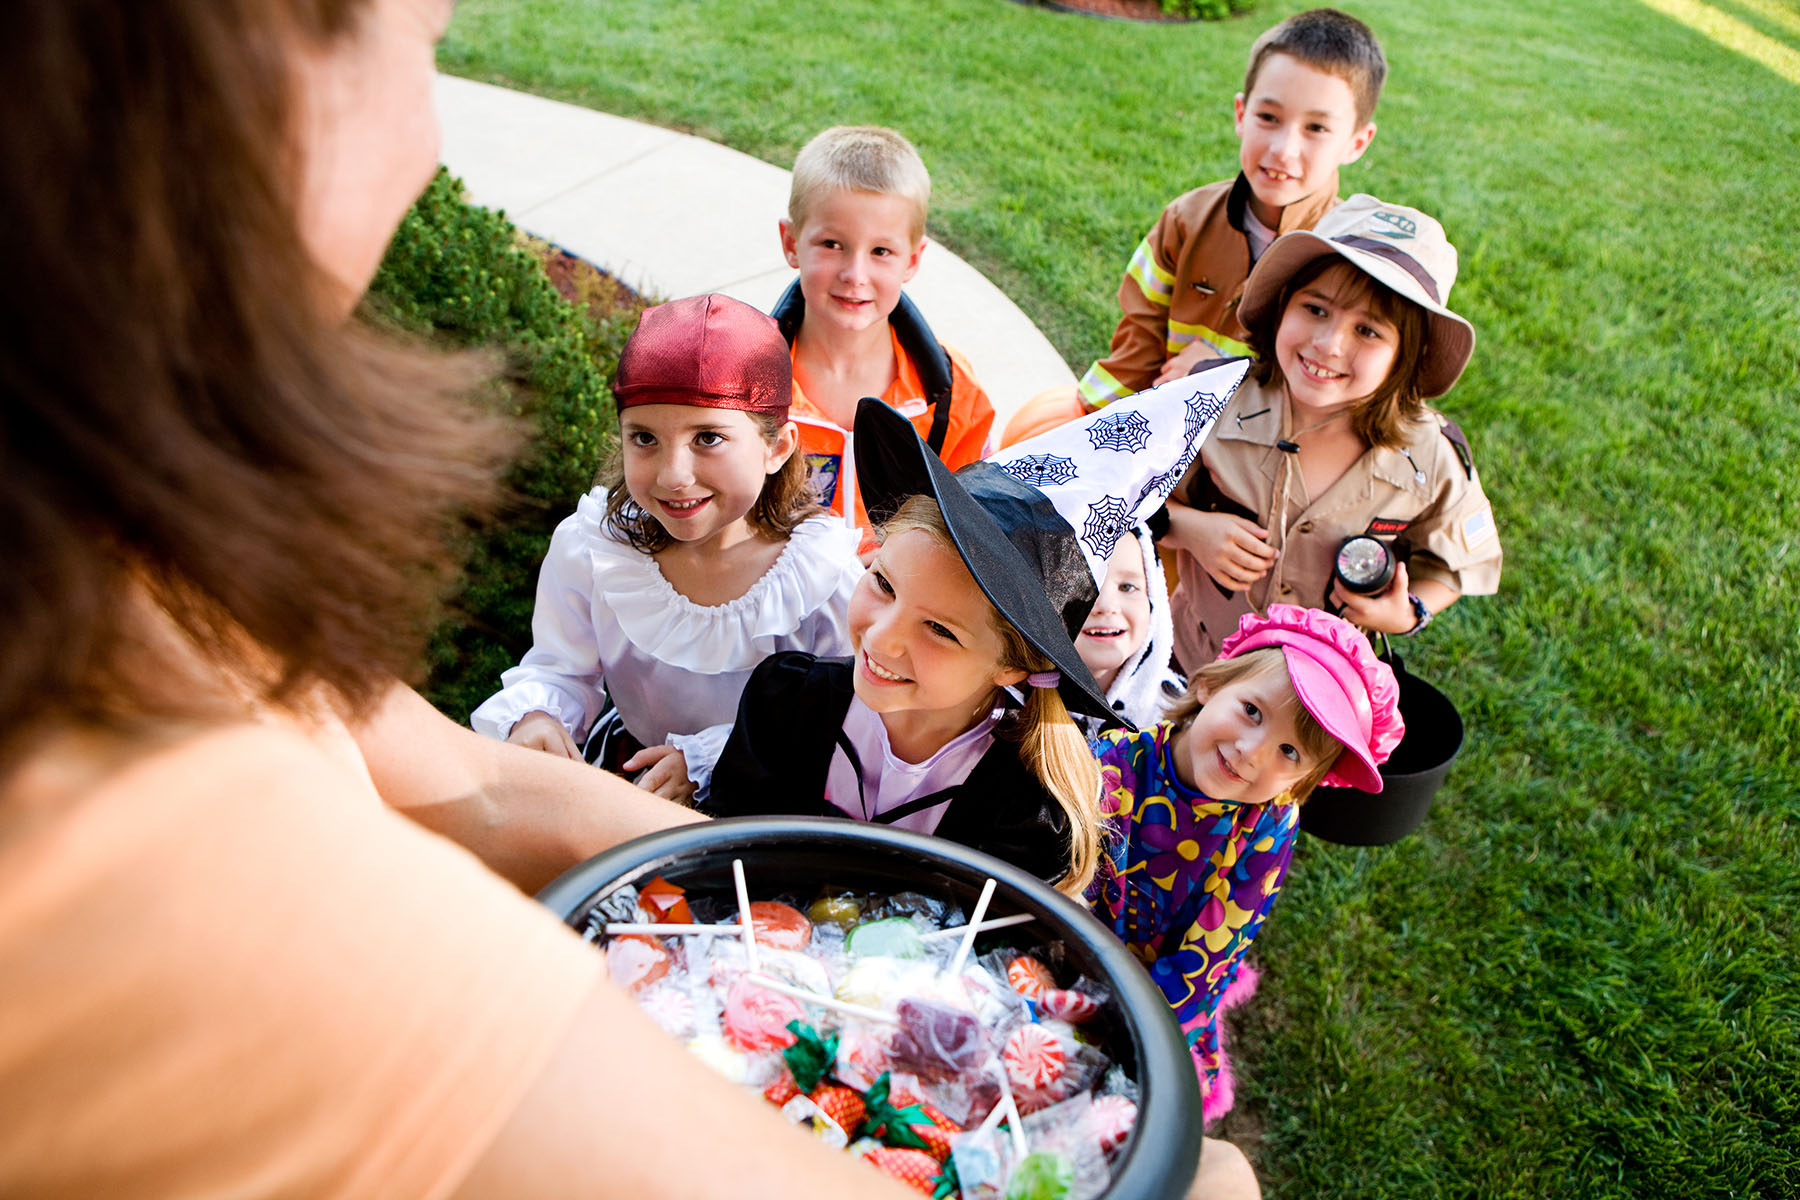 Halloween is the ‘holy day’ Catholic kids shouldn’t miss